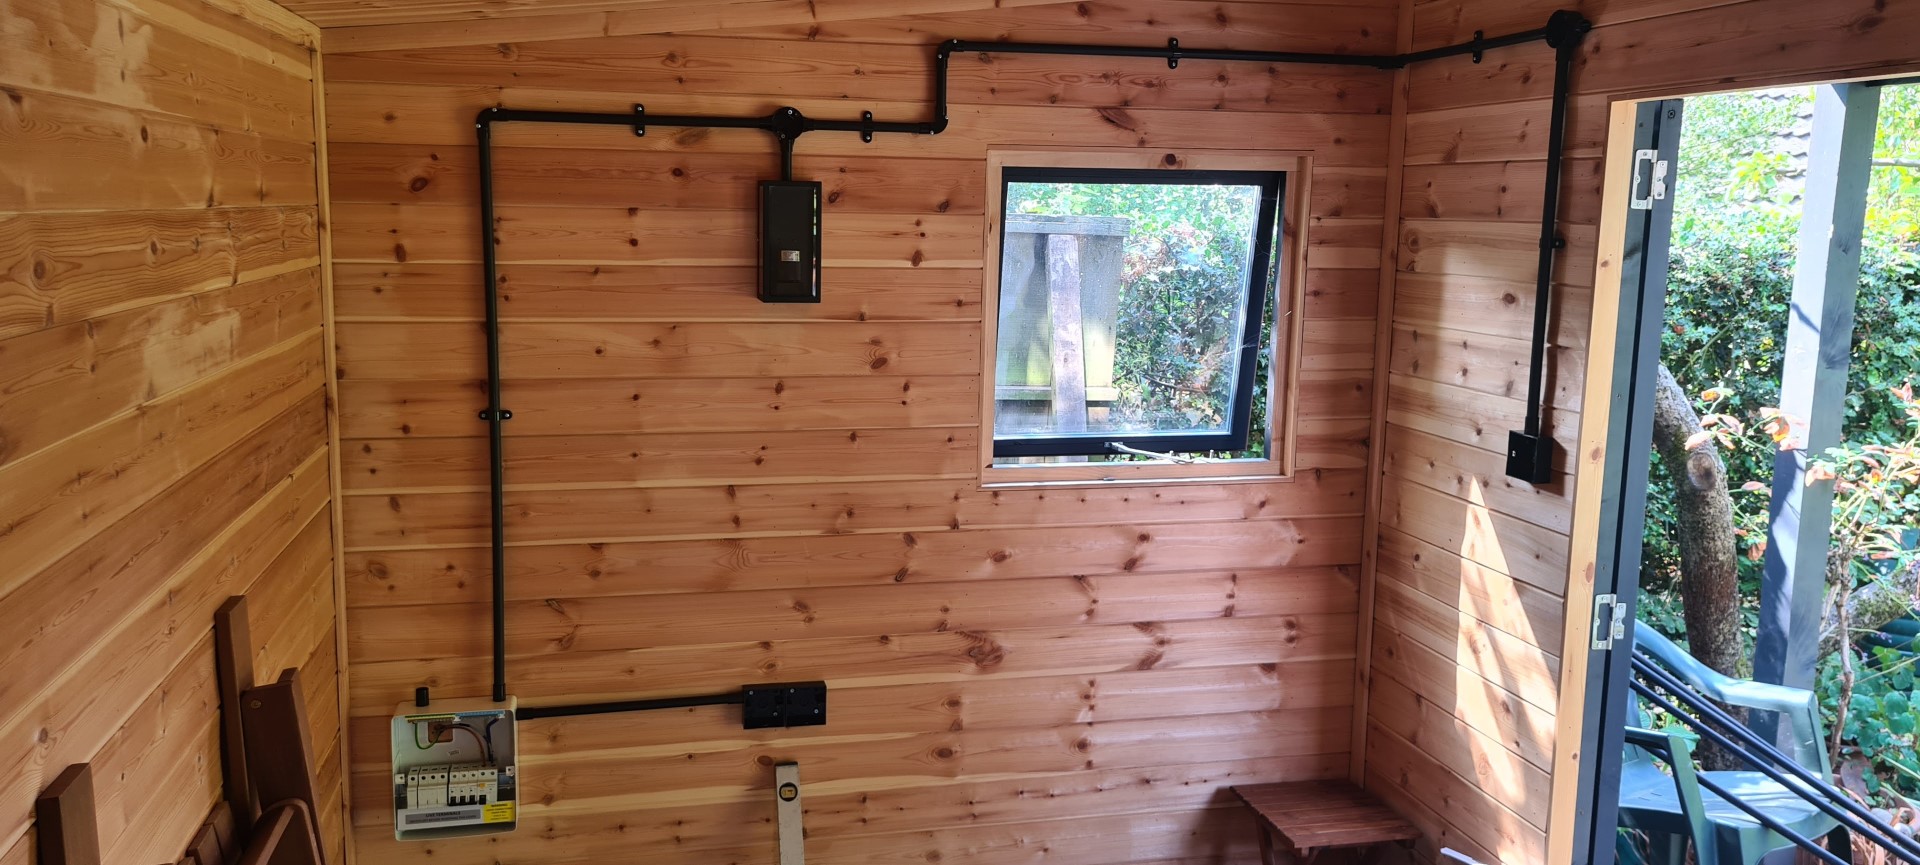 An indoor view of a cabin with H Noble & Sons LTD electrical installation. The walls are lined with natural pine cladding and feature black electrical conduits. A small window framed by the wooden interior looks out to lush greenery, indicating a tranquil setting. The electrical setup includes a prominently displayed fuse box and other devices, showcasing the company's expertise in creating functional spaces